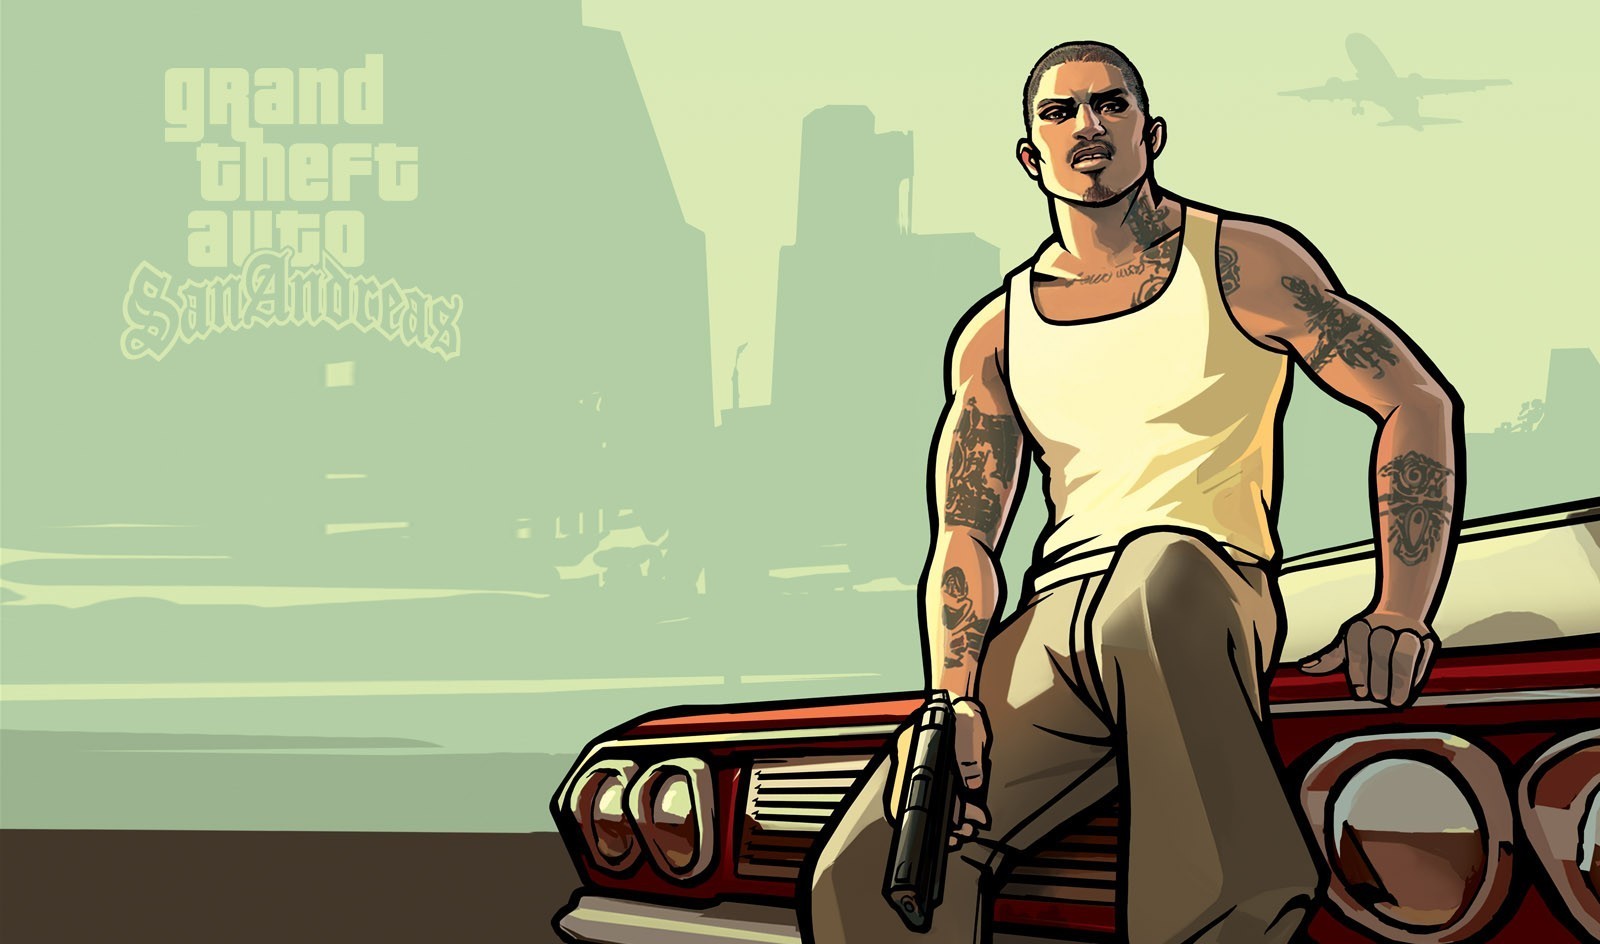 Grand-Theft-Auto-San-Andreas-PC-Game-21